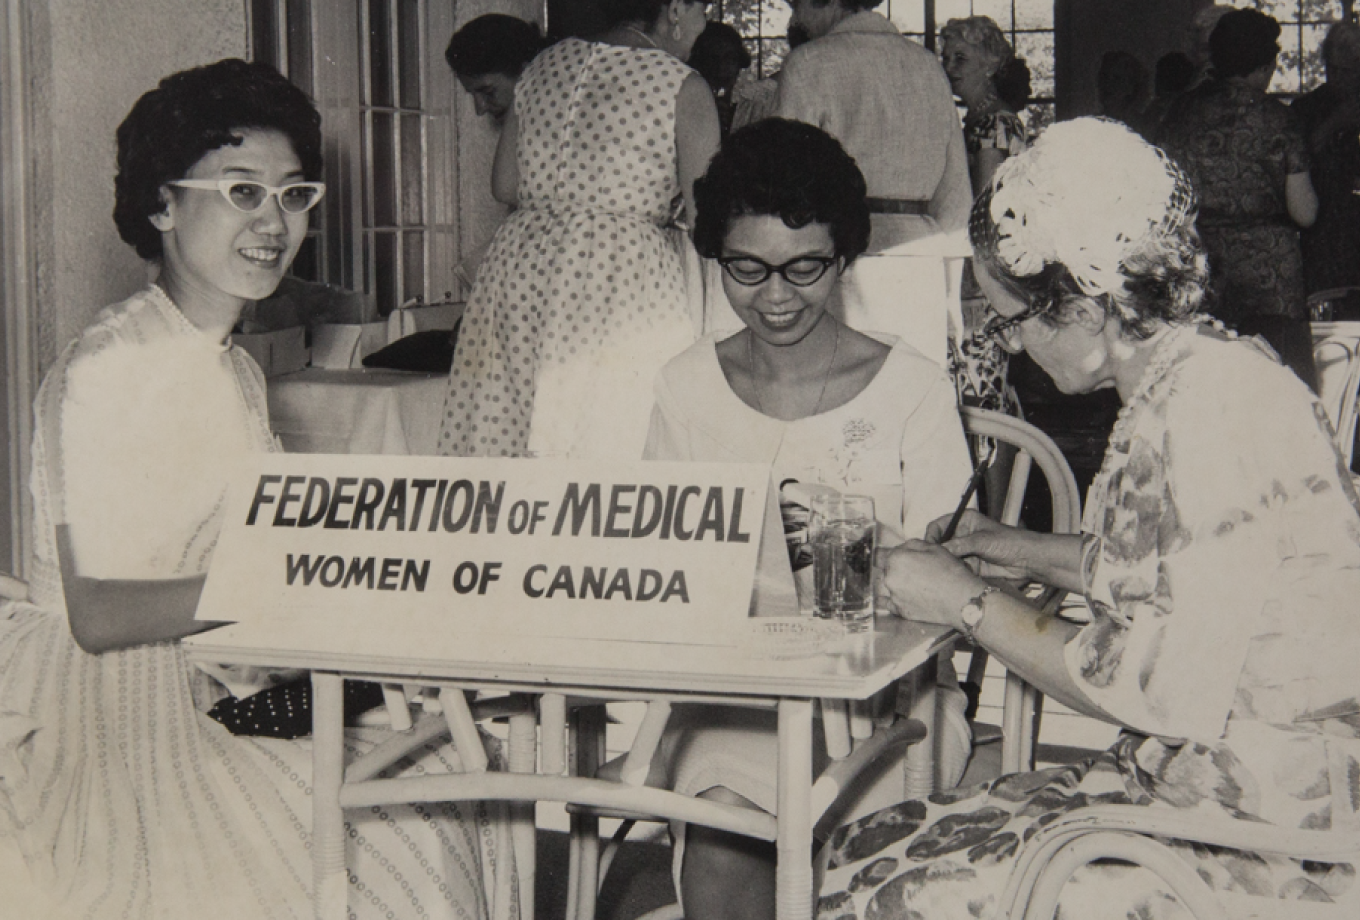 women sitting at a table with a sign on it that says Federation of Medical Women of Canada